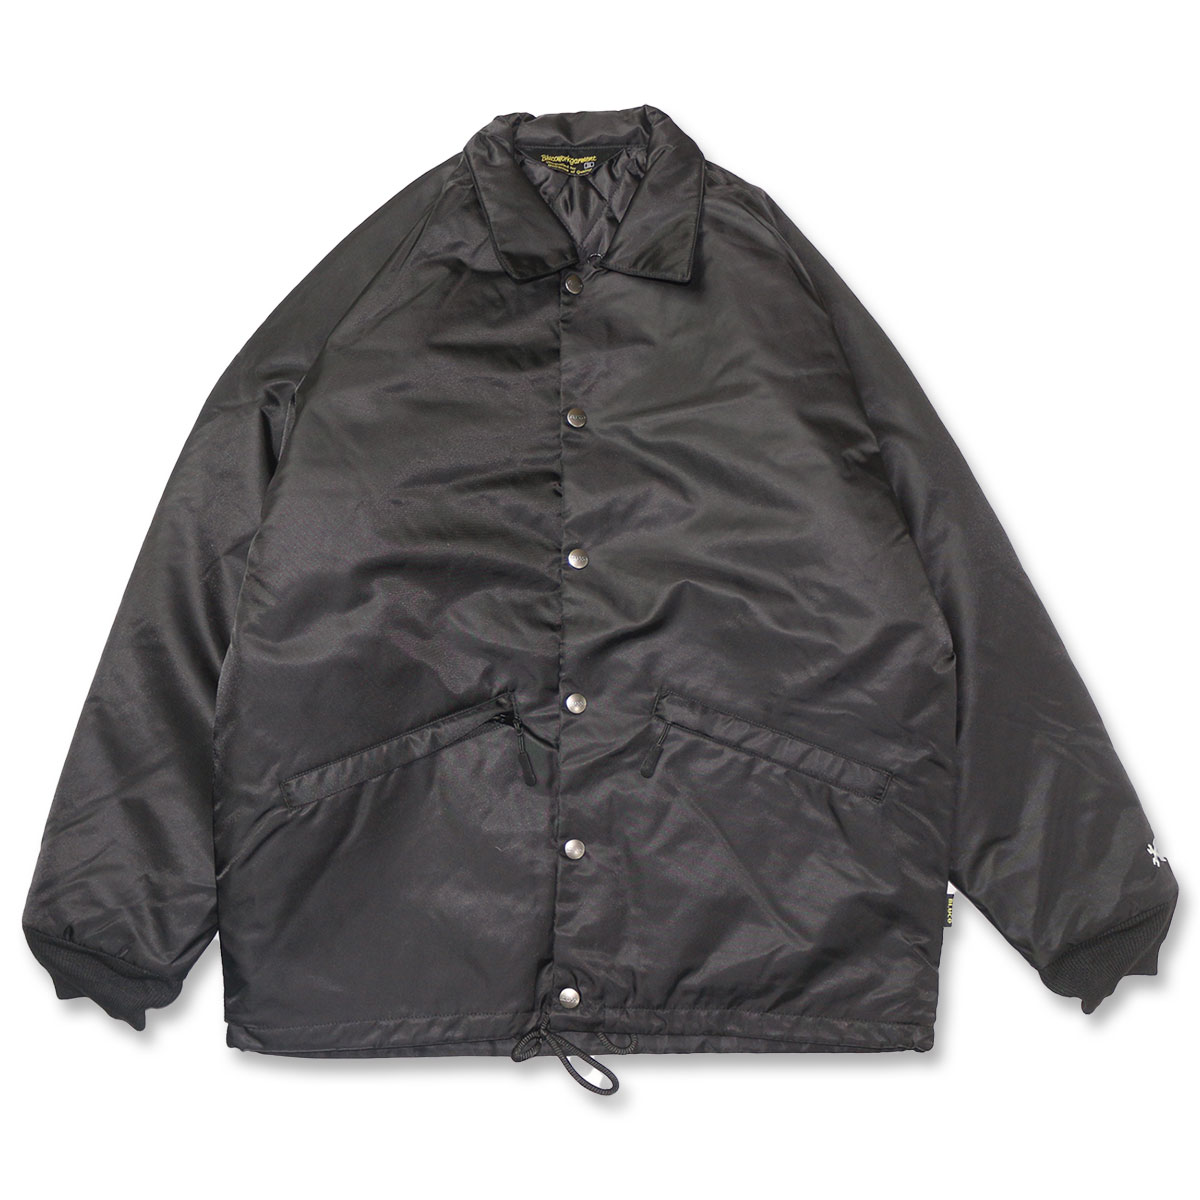 BLUCO(ブルコ) OL-051-022 QUILTING COACH JACKET 4色(BLK/BRG/NVY/OLV)☆送料無料☆｜pinsstore｜02